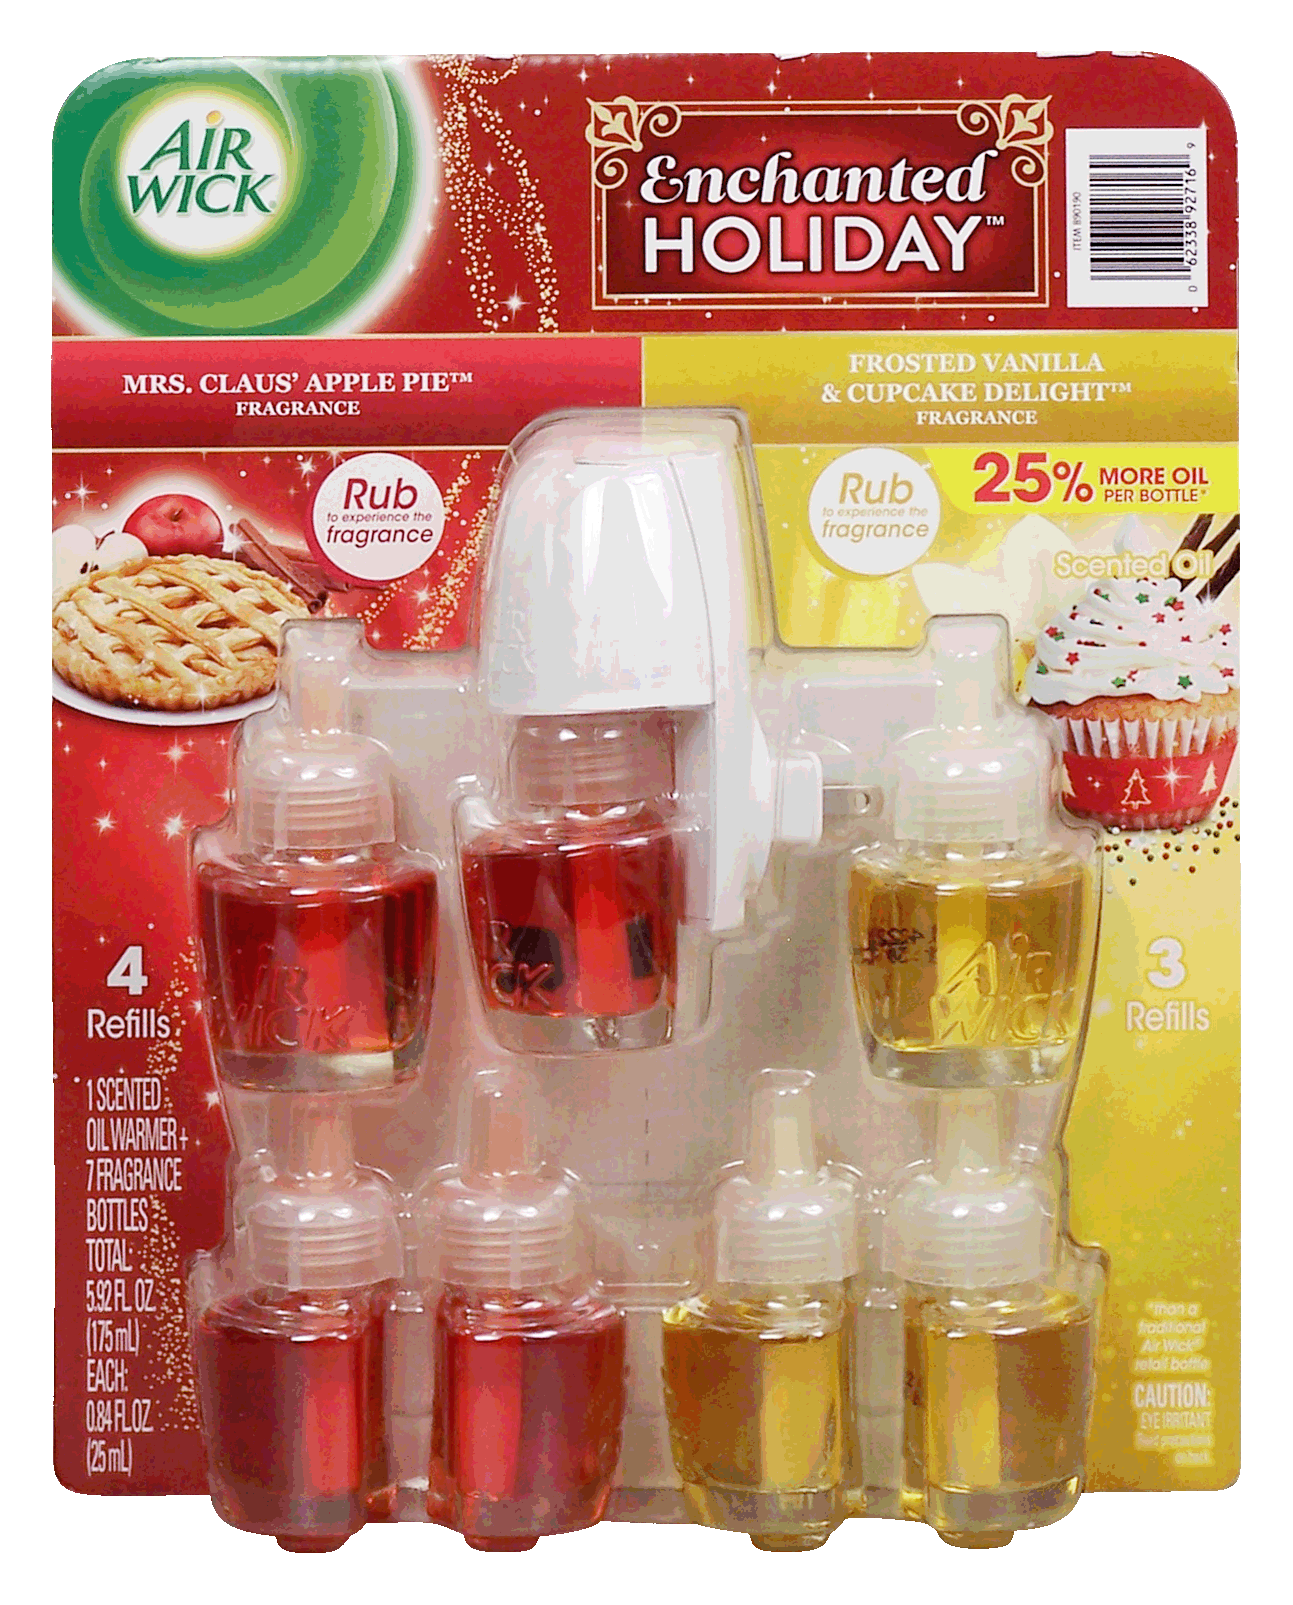 Air Wick Enchanted Holiday 1 scented warmer, 4 apple pie refills, 3 vanilla refills Full-Size Picture